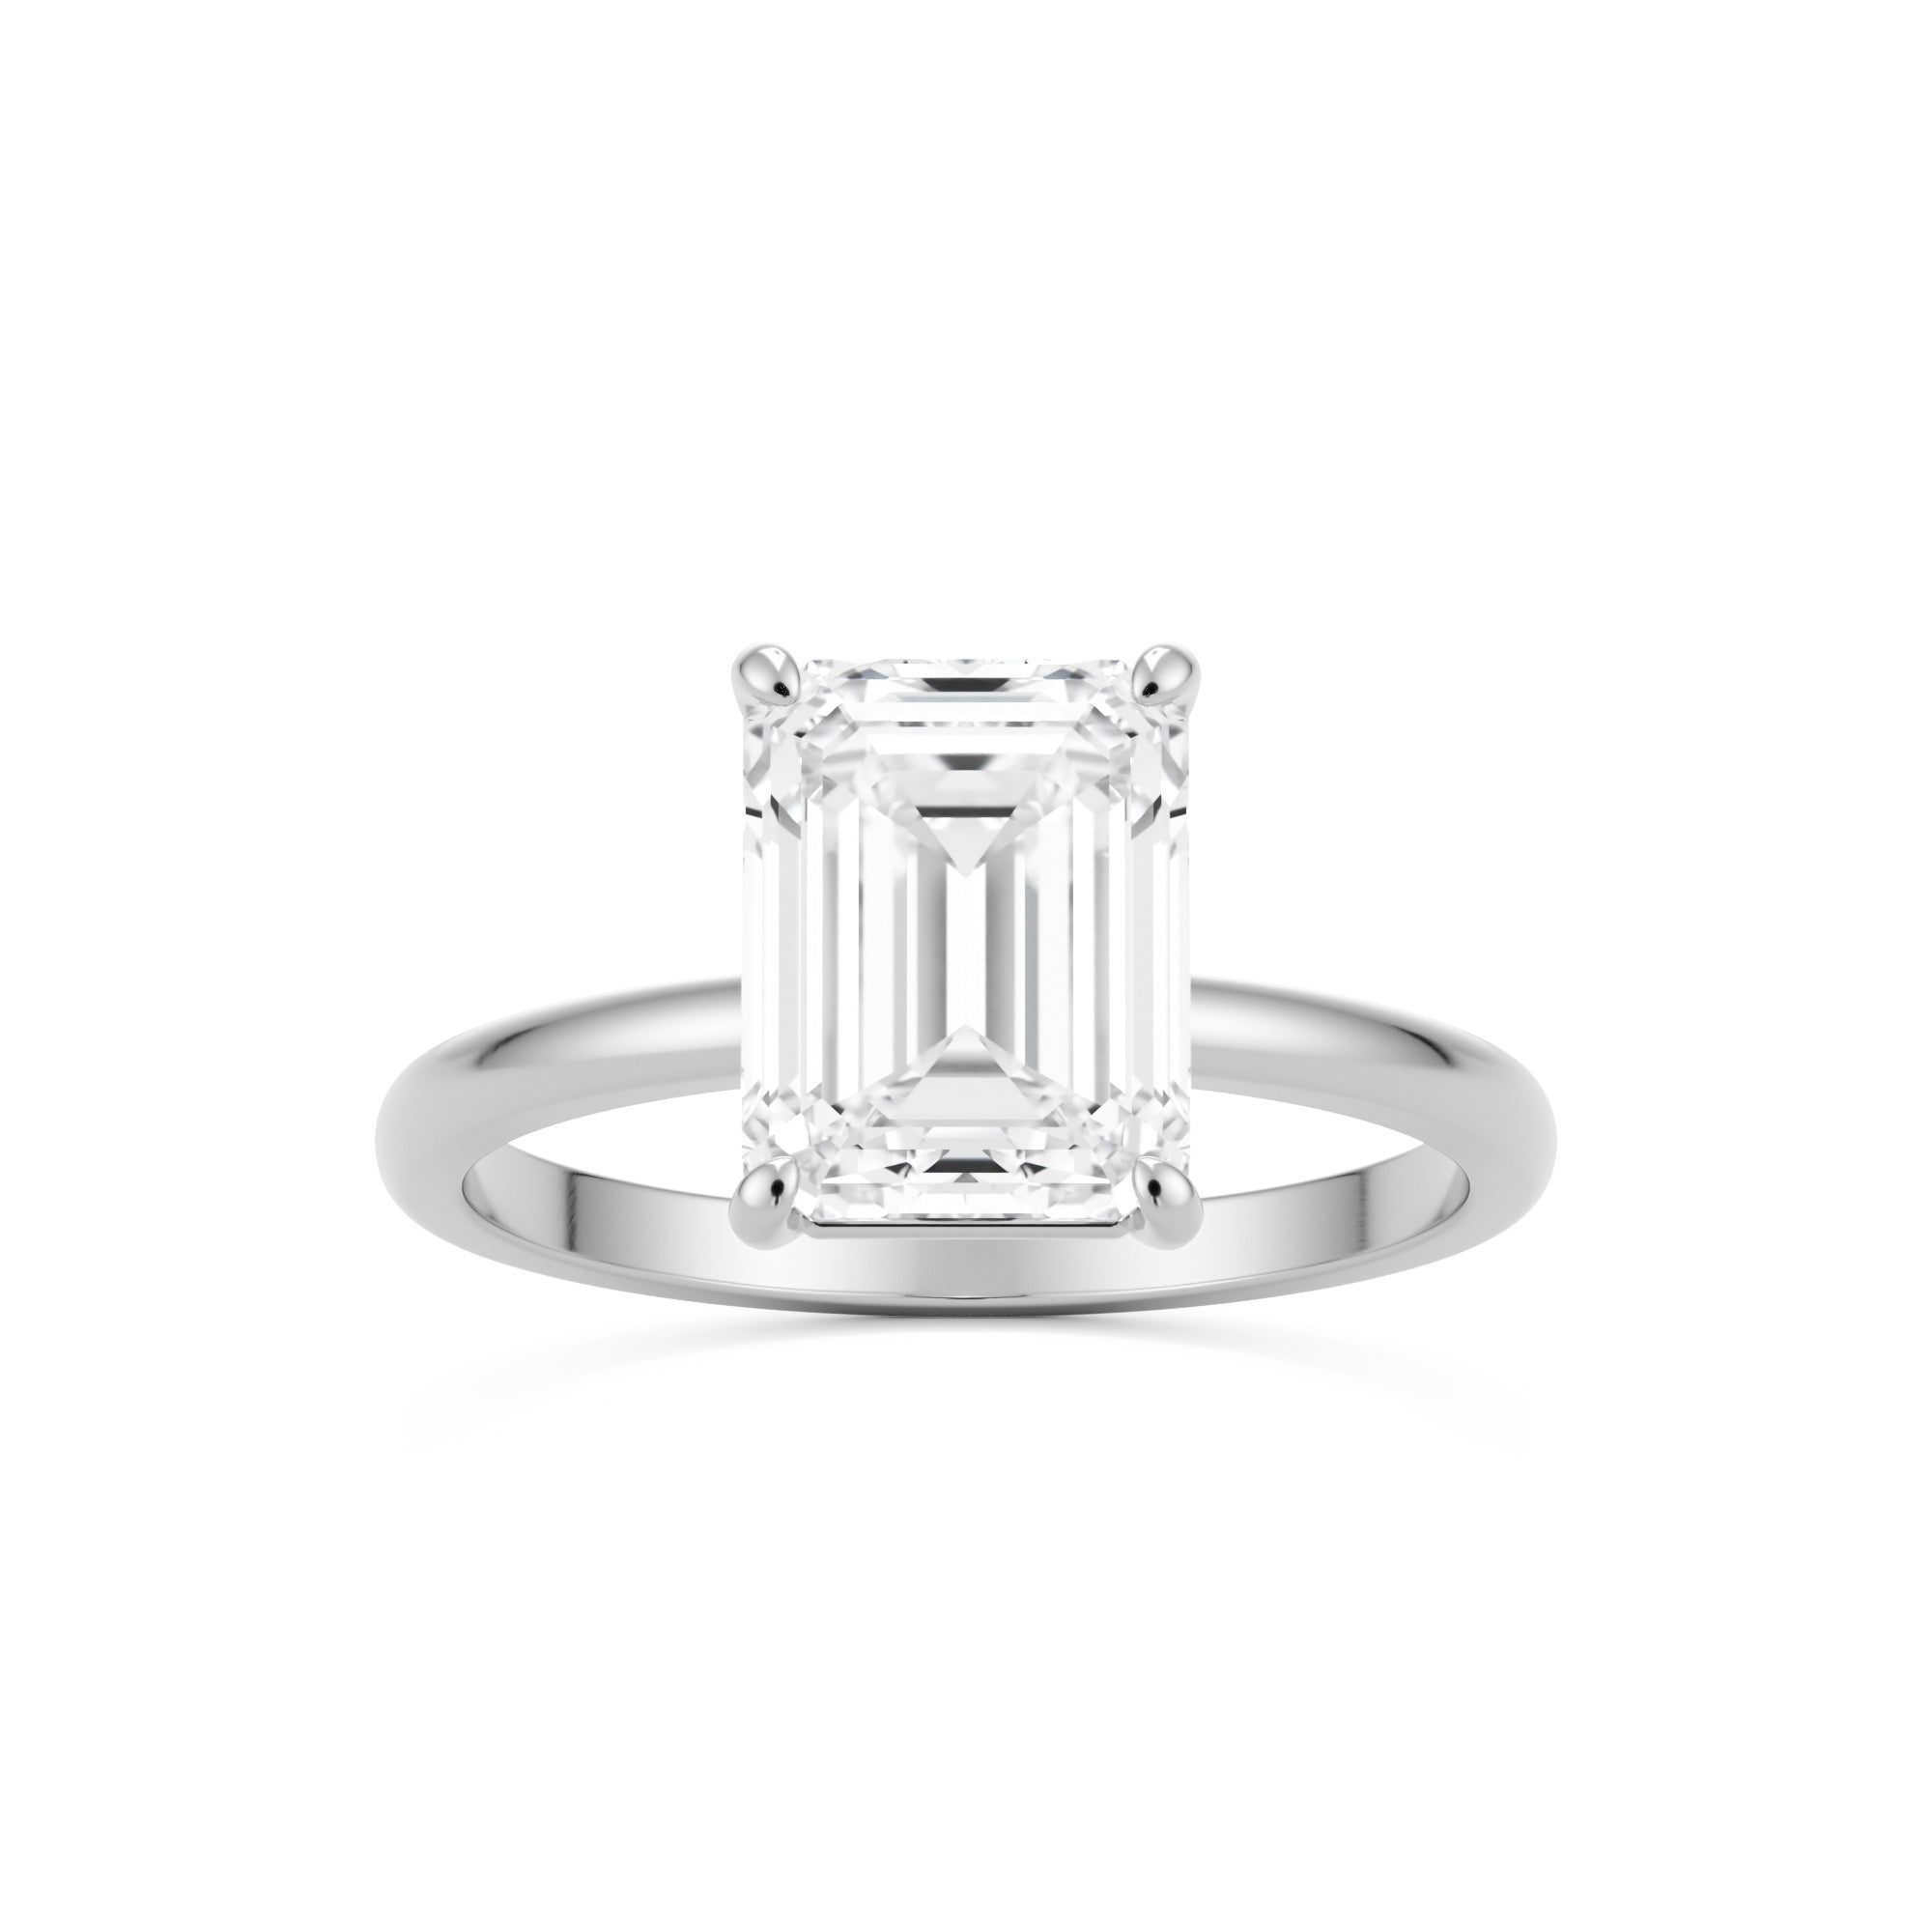 Emerald Cut Diamond Solitaire Engagement Ring 14K Yellow Gold